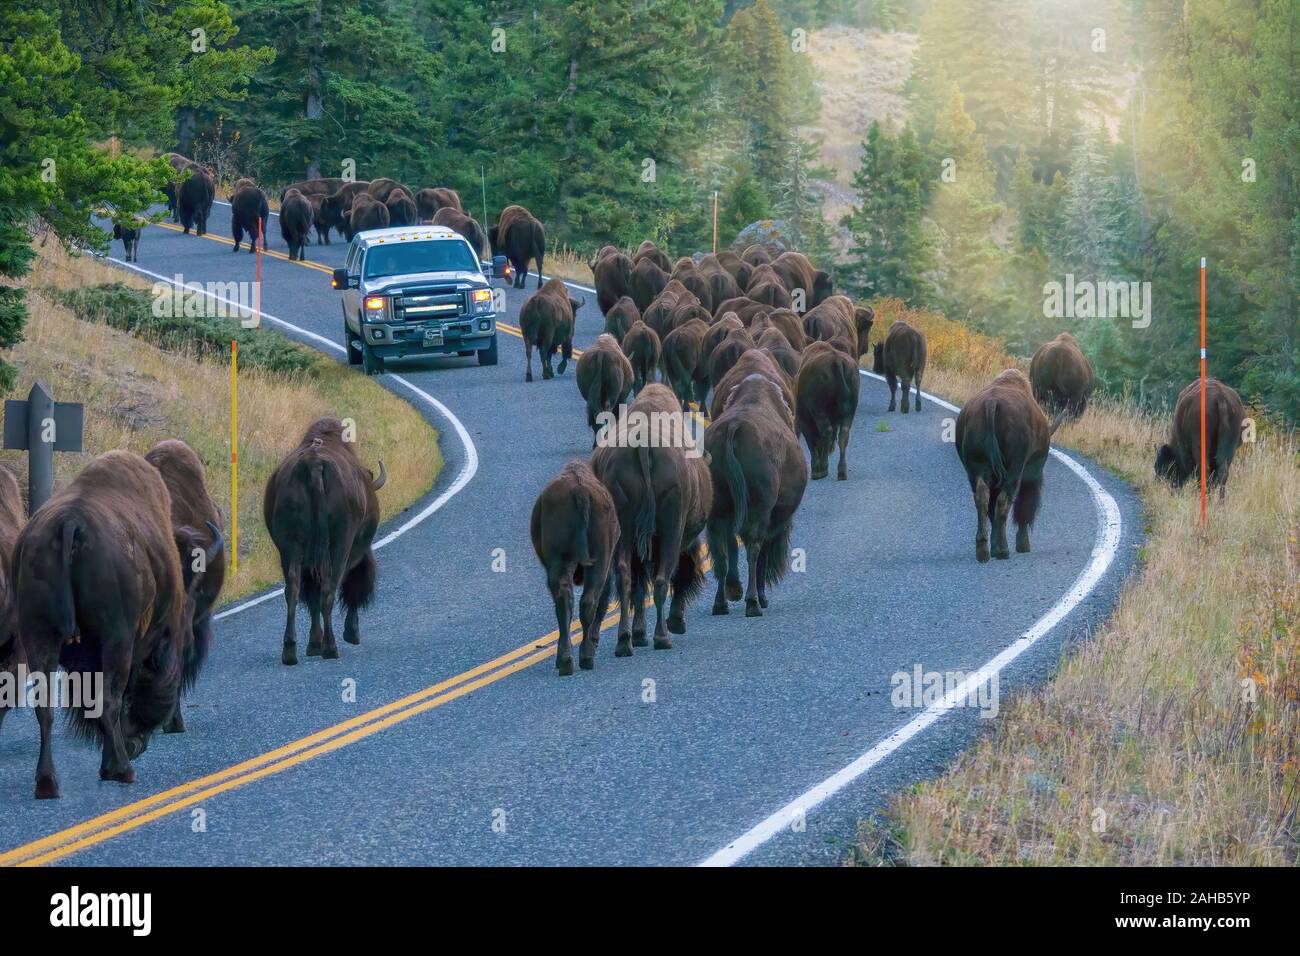 A vehicle stopped while a herd of large bison (Bison bison) walk past it on a highway in the Lamar Valley, Yellowstone National Park. Stock Photo